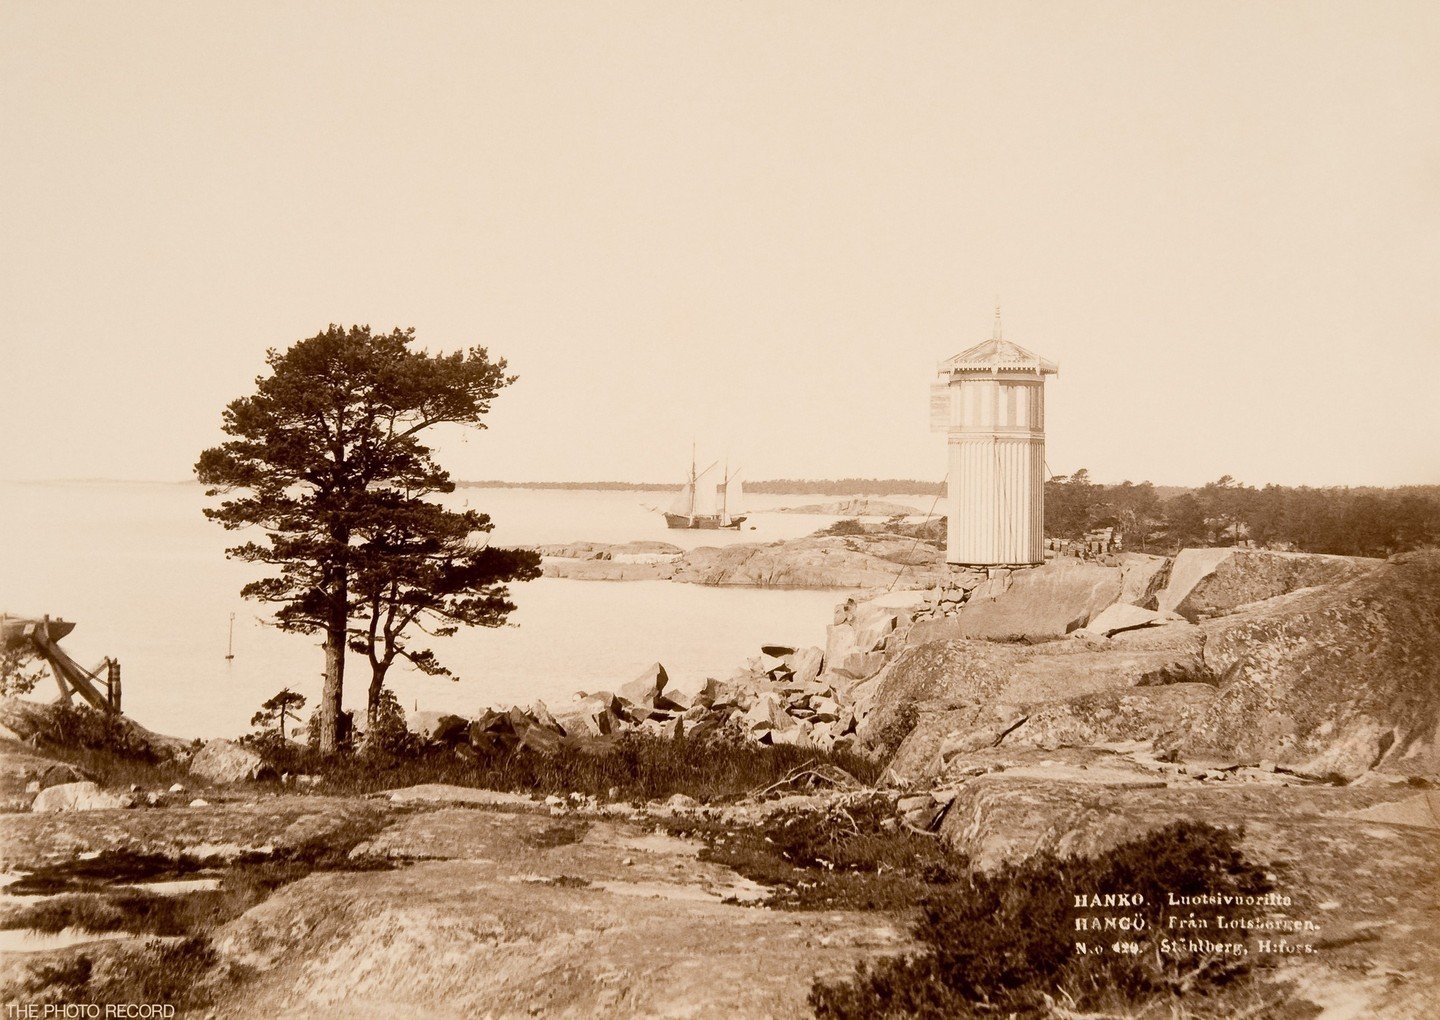 Visitors to Hanko's spa town in the late 1800s often took seaside promenades as part of their leisure activities. These walks along the coast allowed them to enjoy the sandy beaches and cliffs, taking in the fresh sea air and tranquil surroundings.⁠
